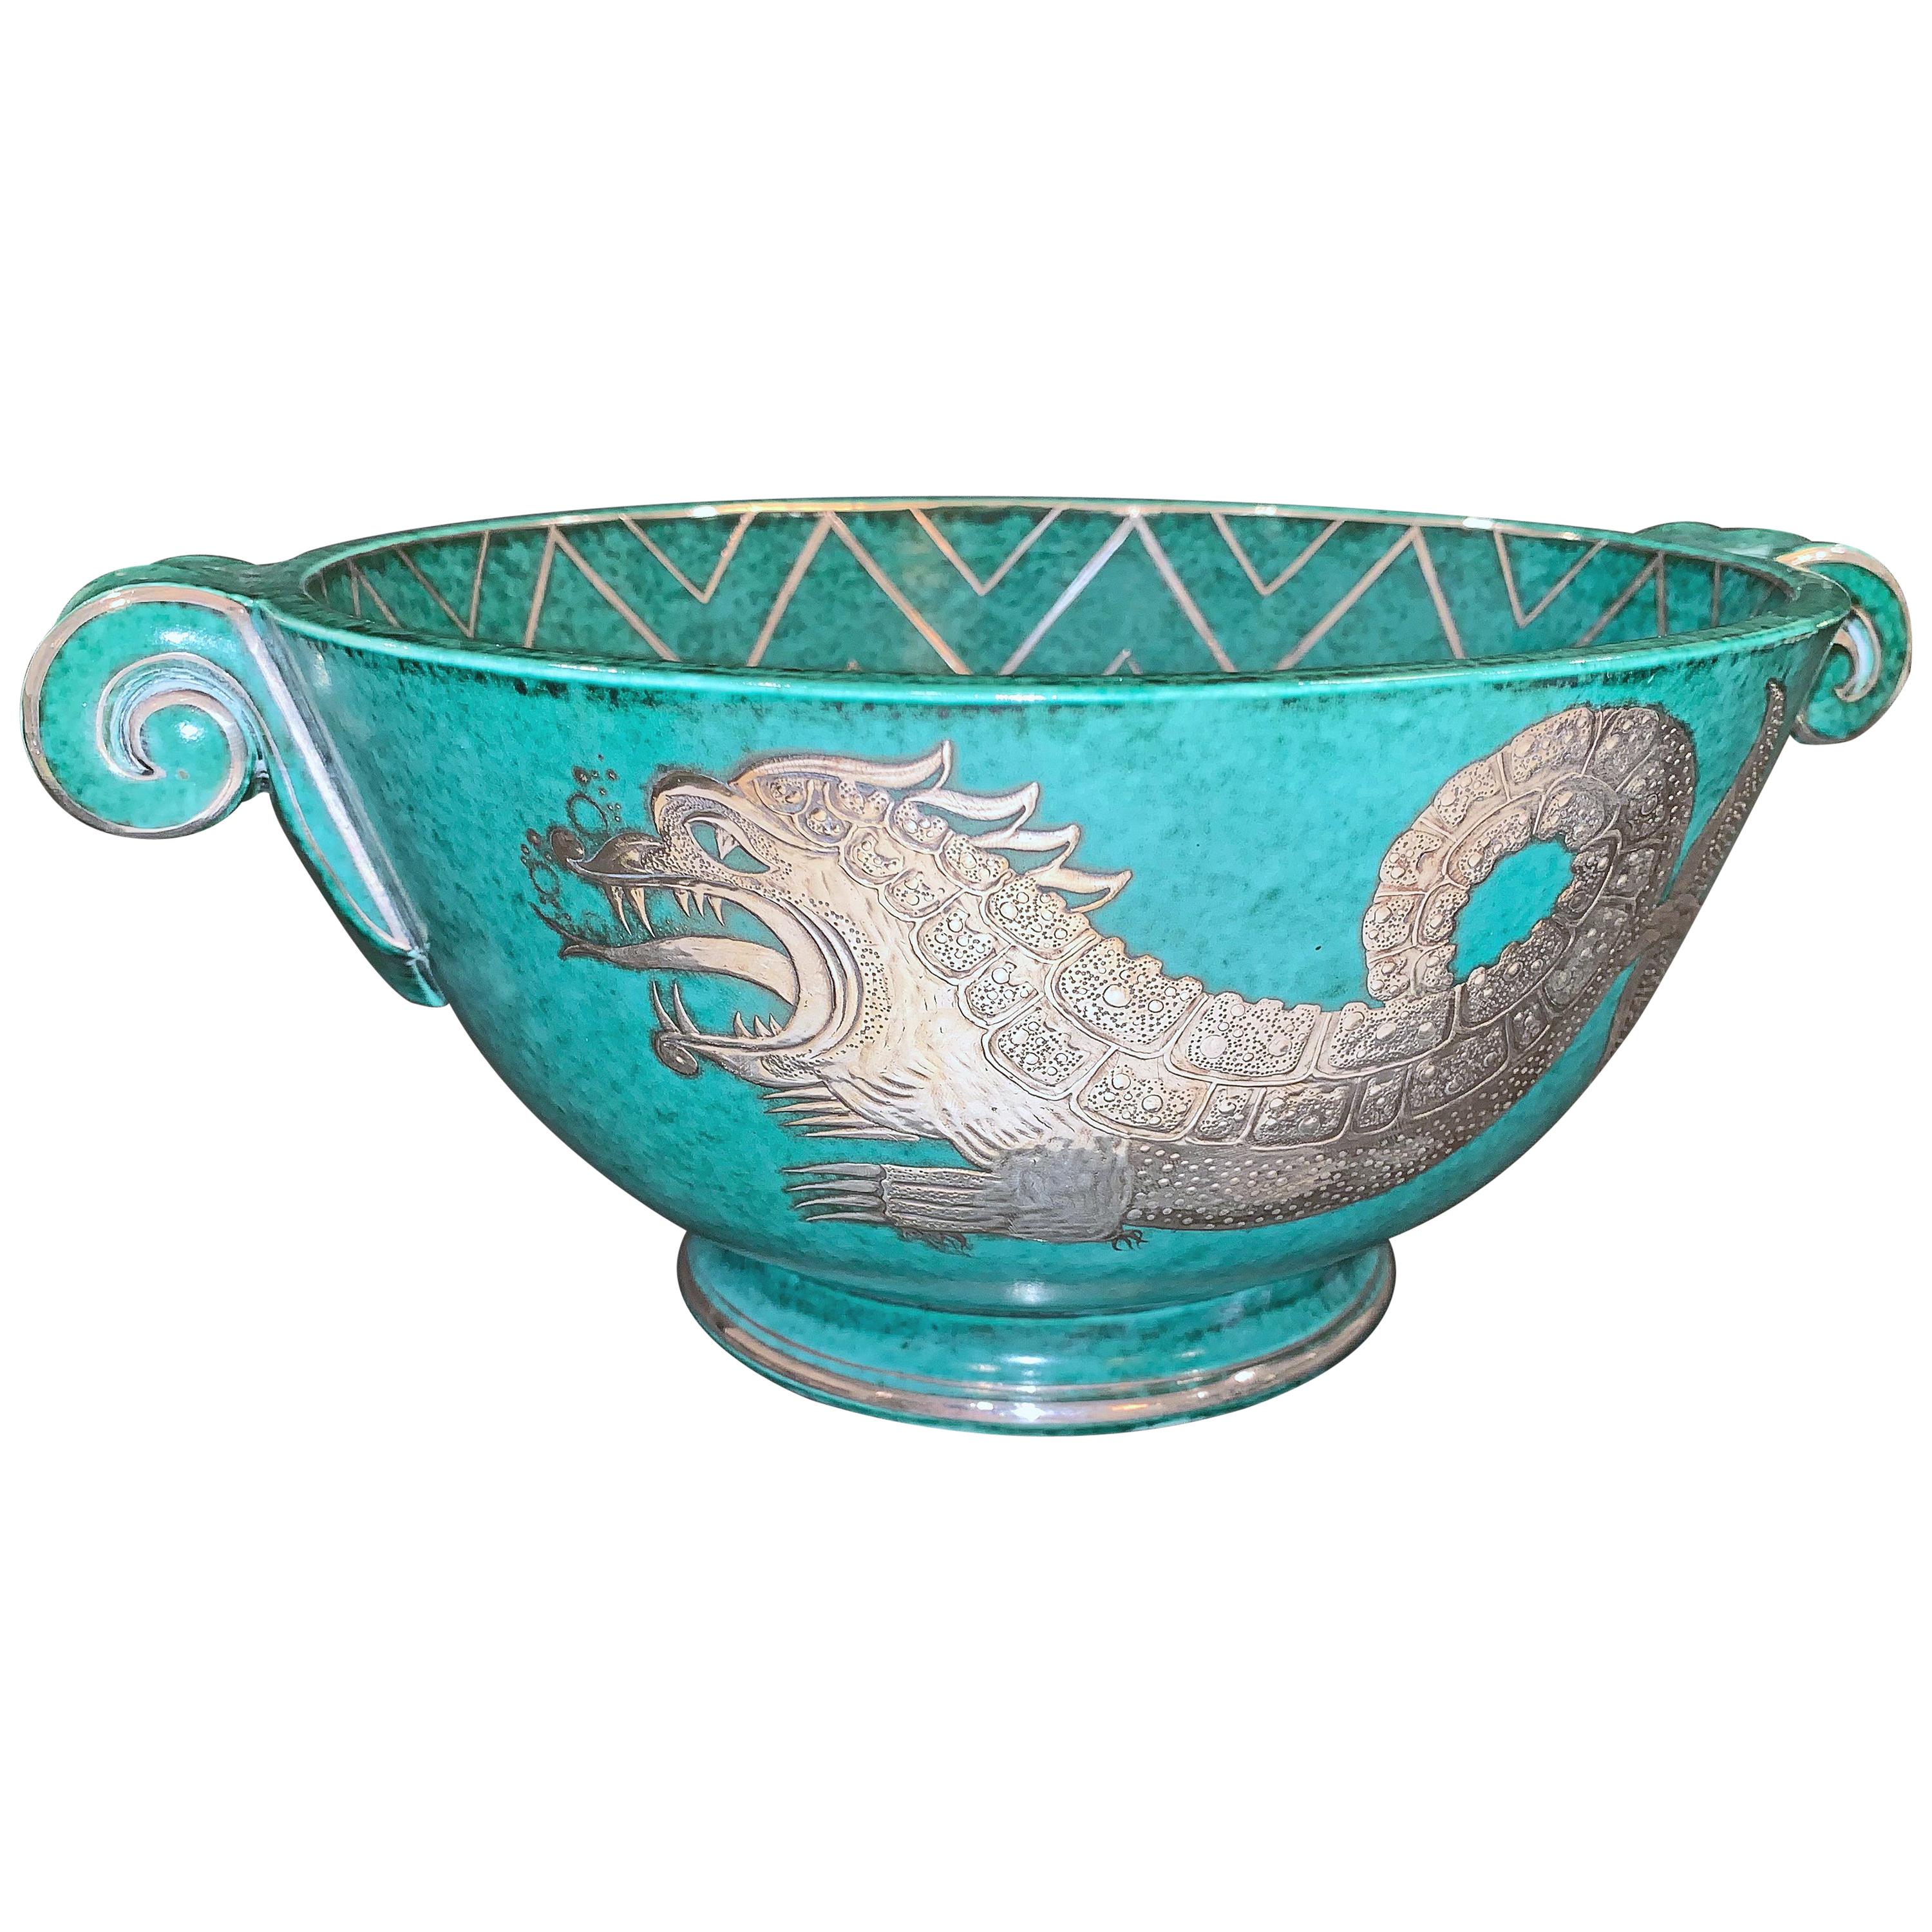 "Sea Dragon with Chevrons, " Large, Unique Art Deco Bowl by Kåge for Gustavsberg